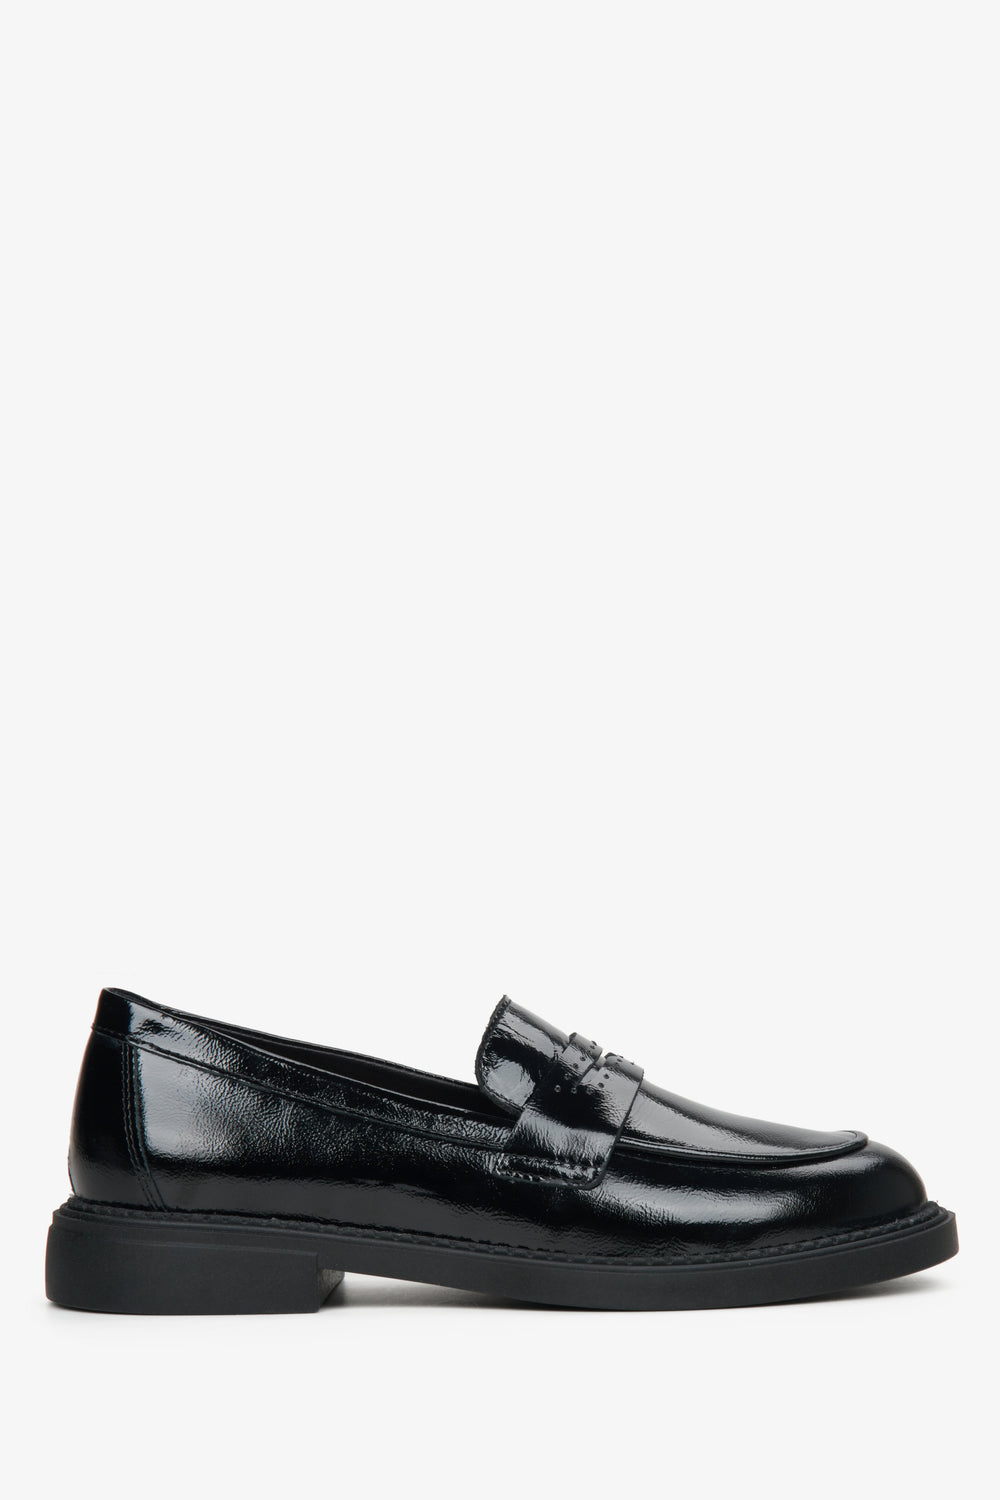 Women's Black Penny Loafers made of Patent Genuine Leather Estro ER00114535.